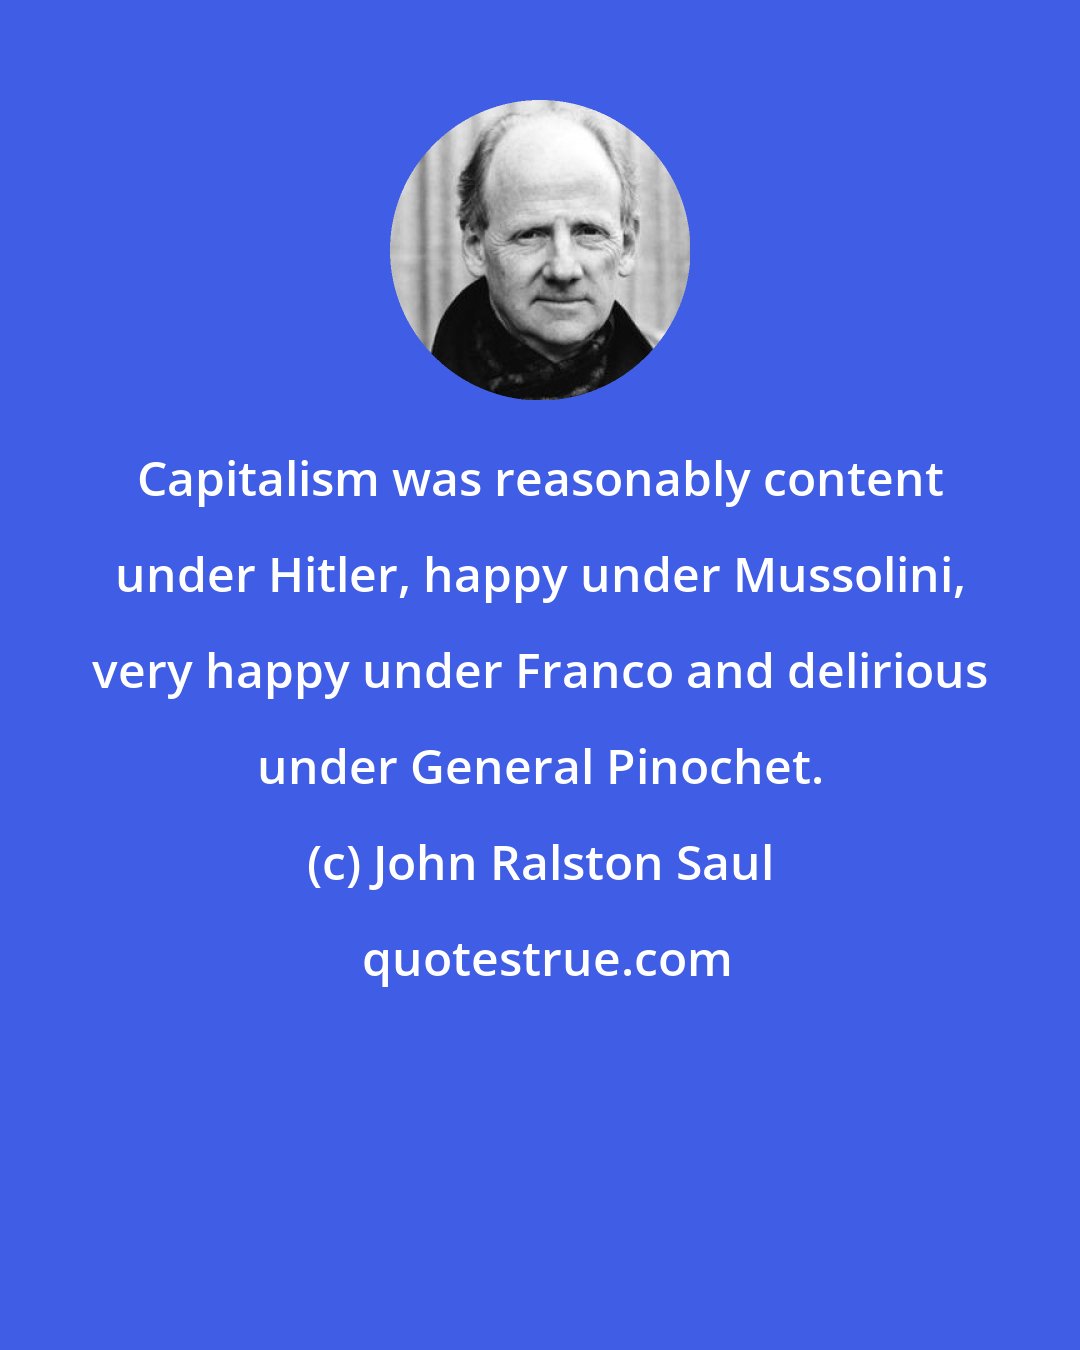 John Ralston Saul: Capitalism was reasonably content under Hitler, happy under Mussolini, very happy under Franco and delirious under General Pinochet.